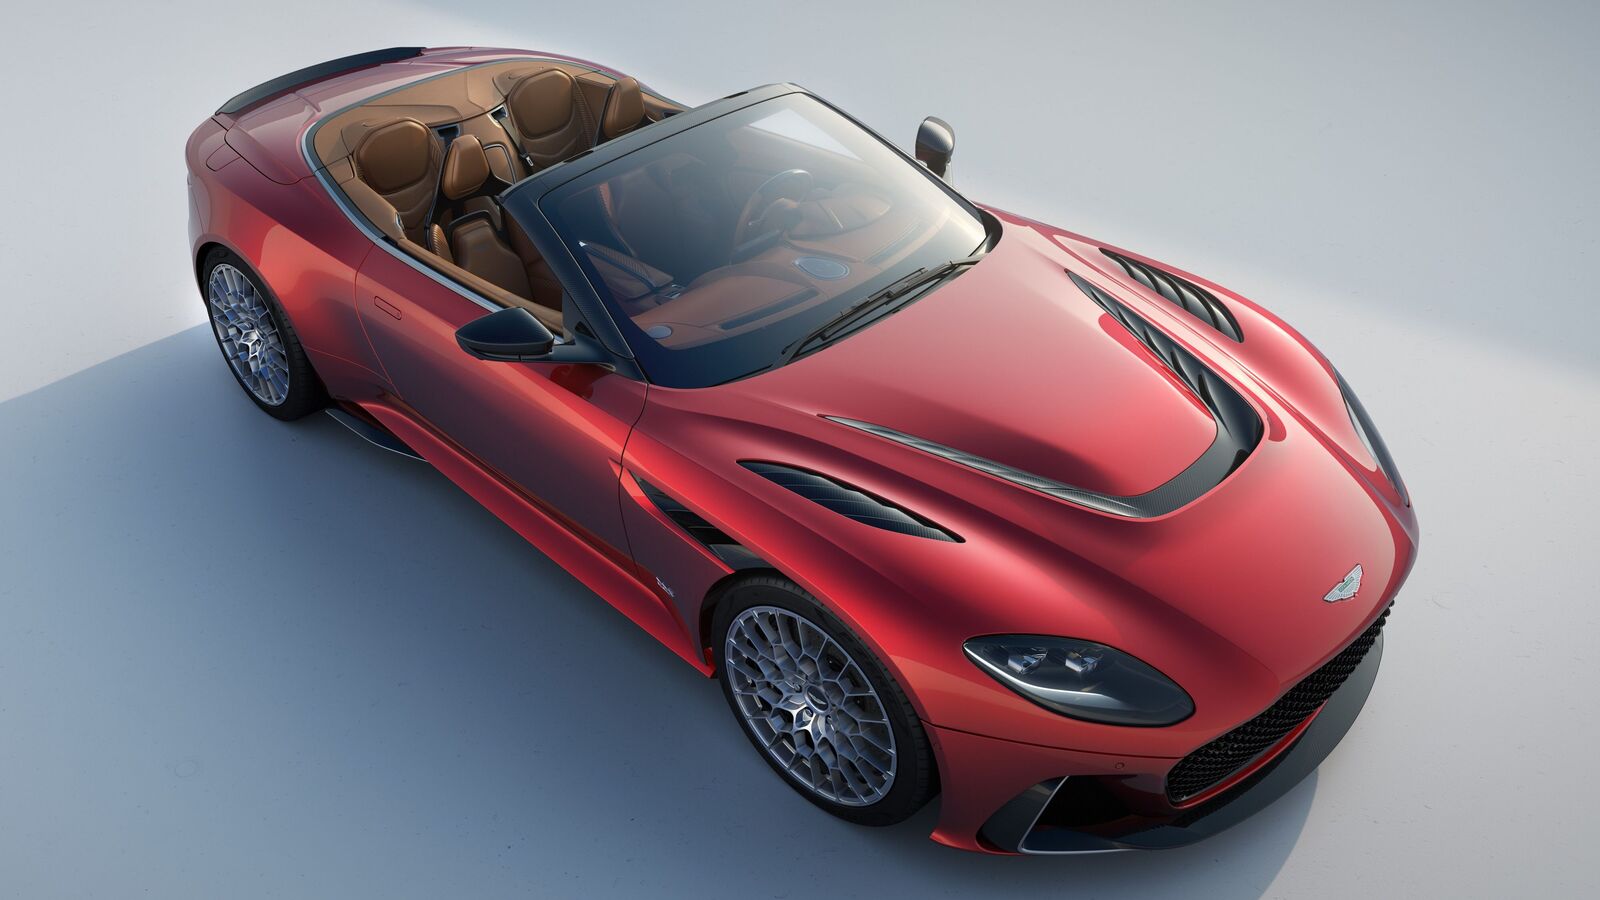 Aston Martin to release first BEV model in 2025